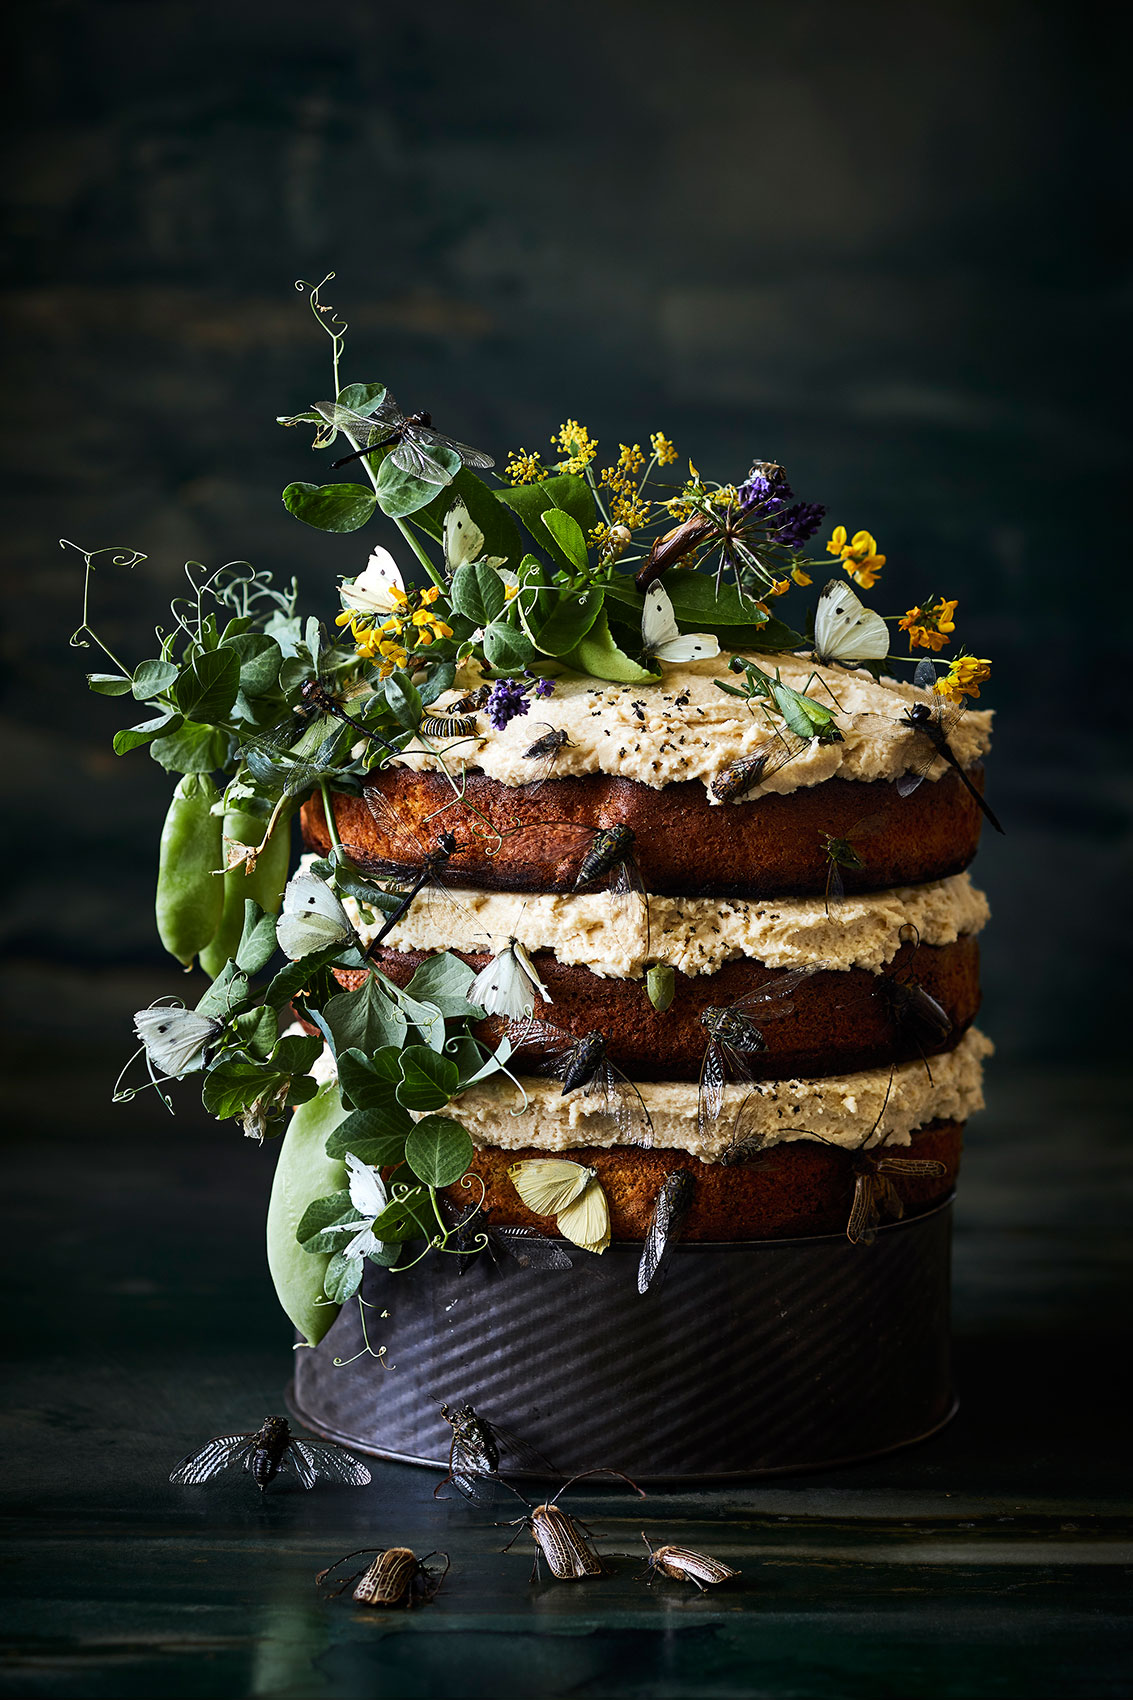 Grand Finale Picnic Honey Cake • The Bug Project • Personal Work &  Food Photography